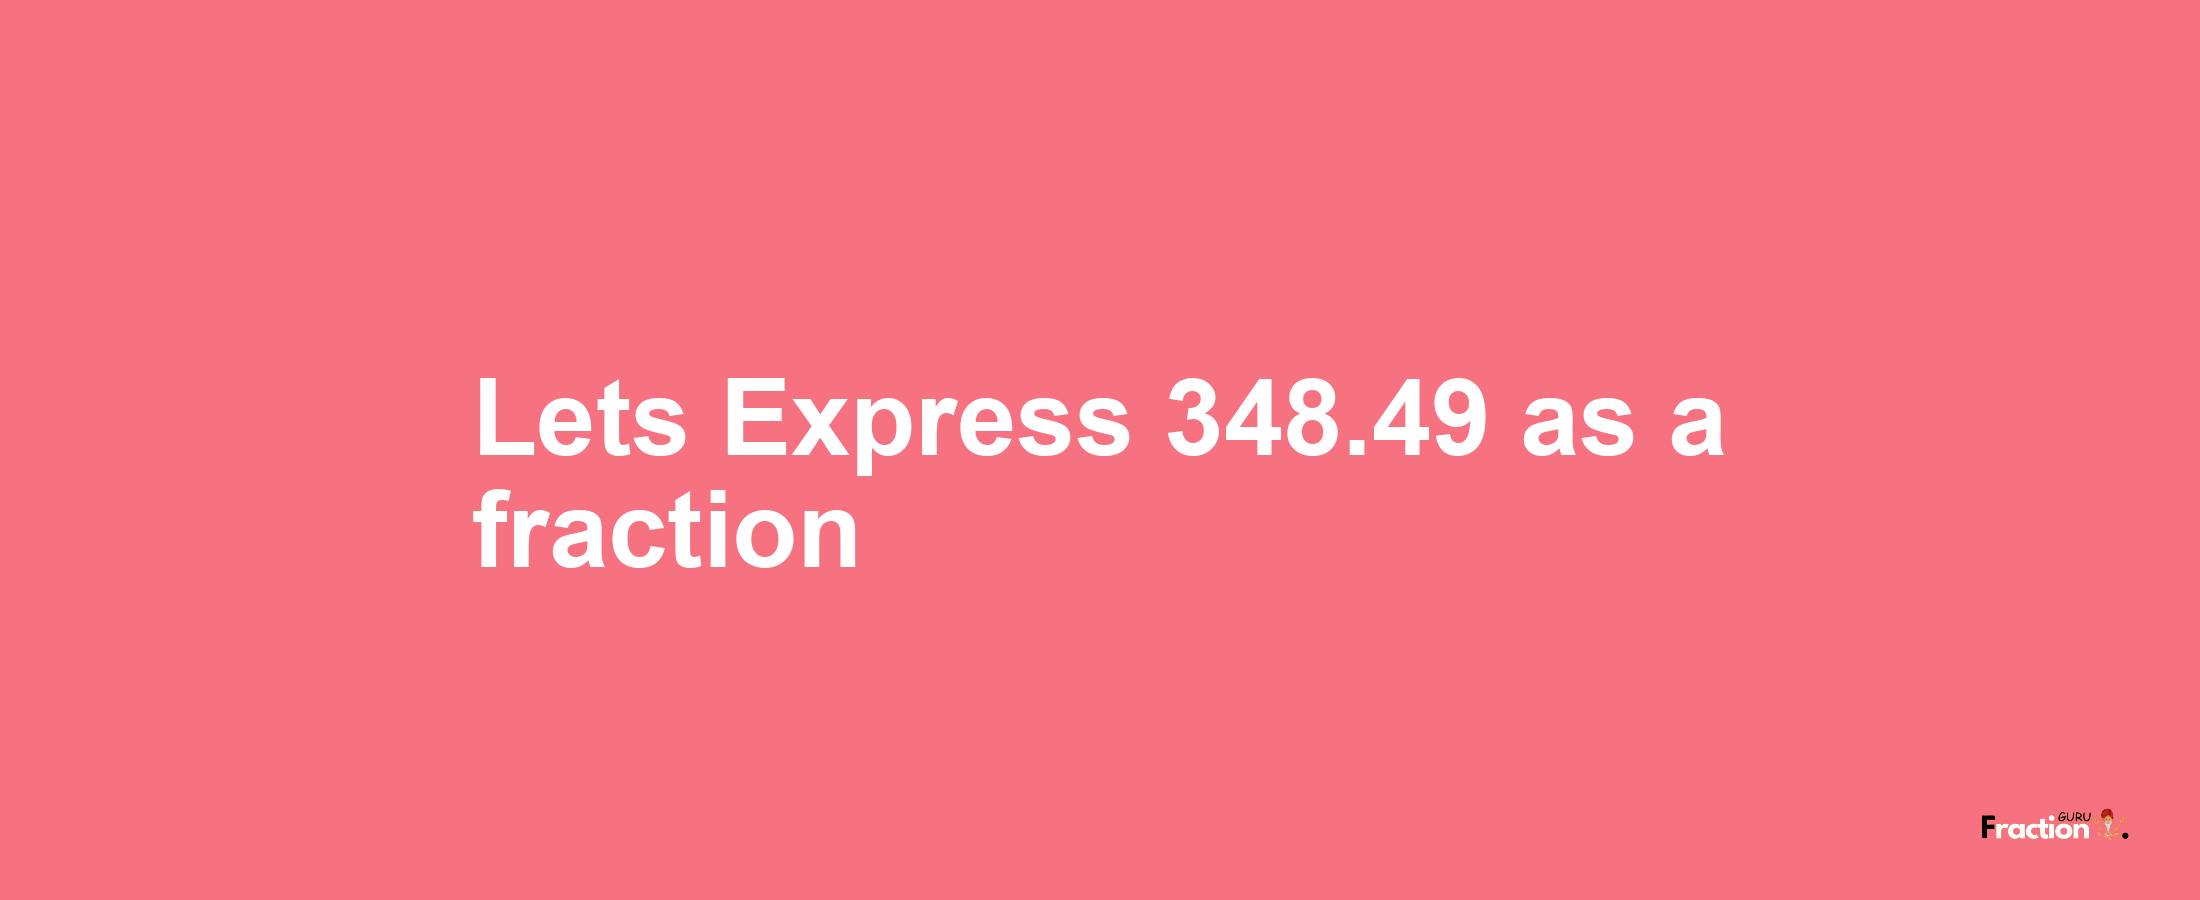 Lets Express 348.49 as afraction